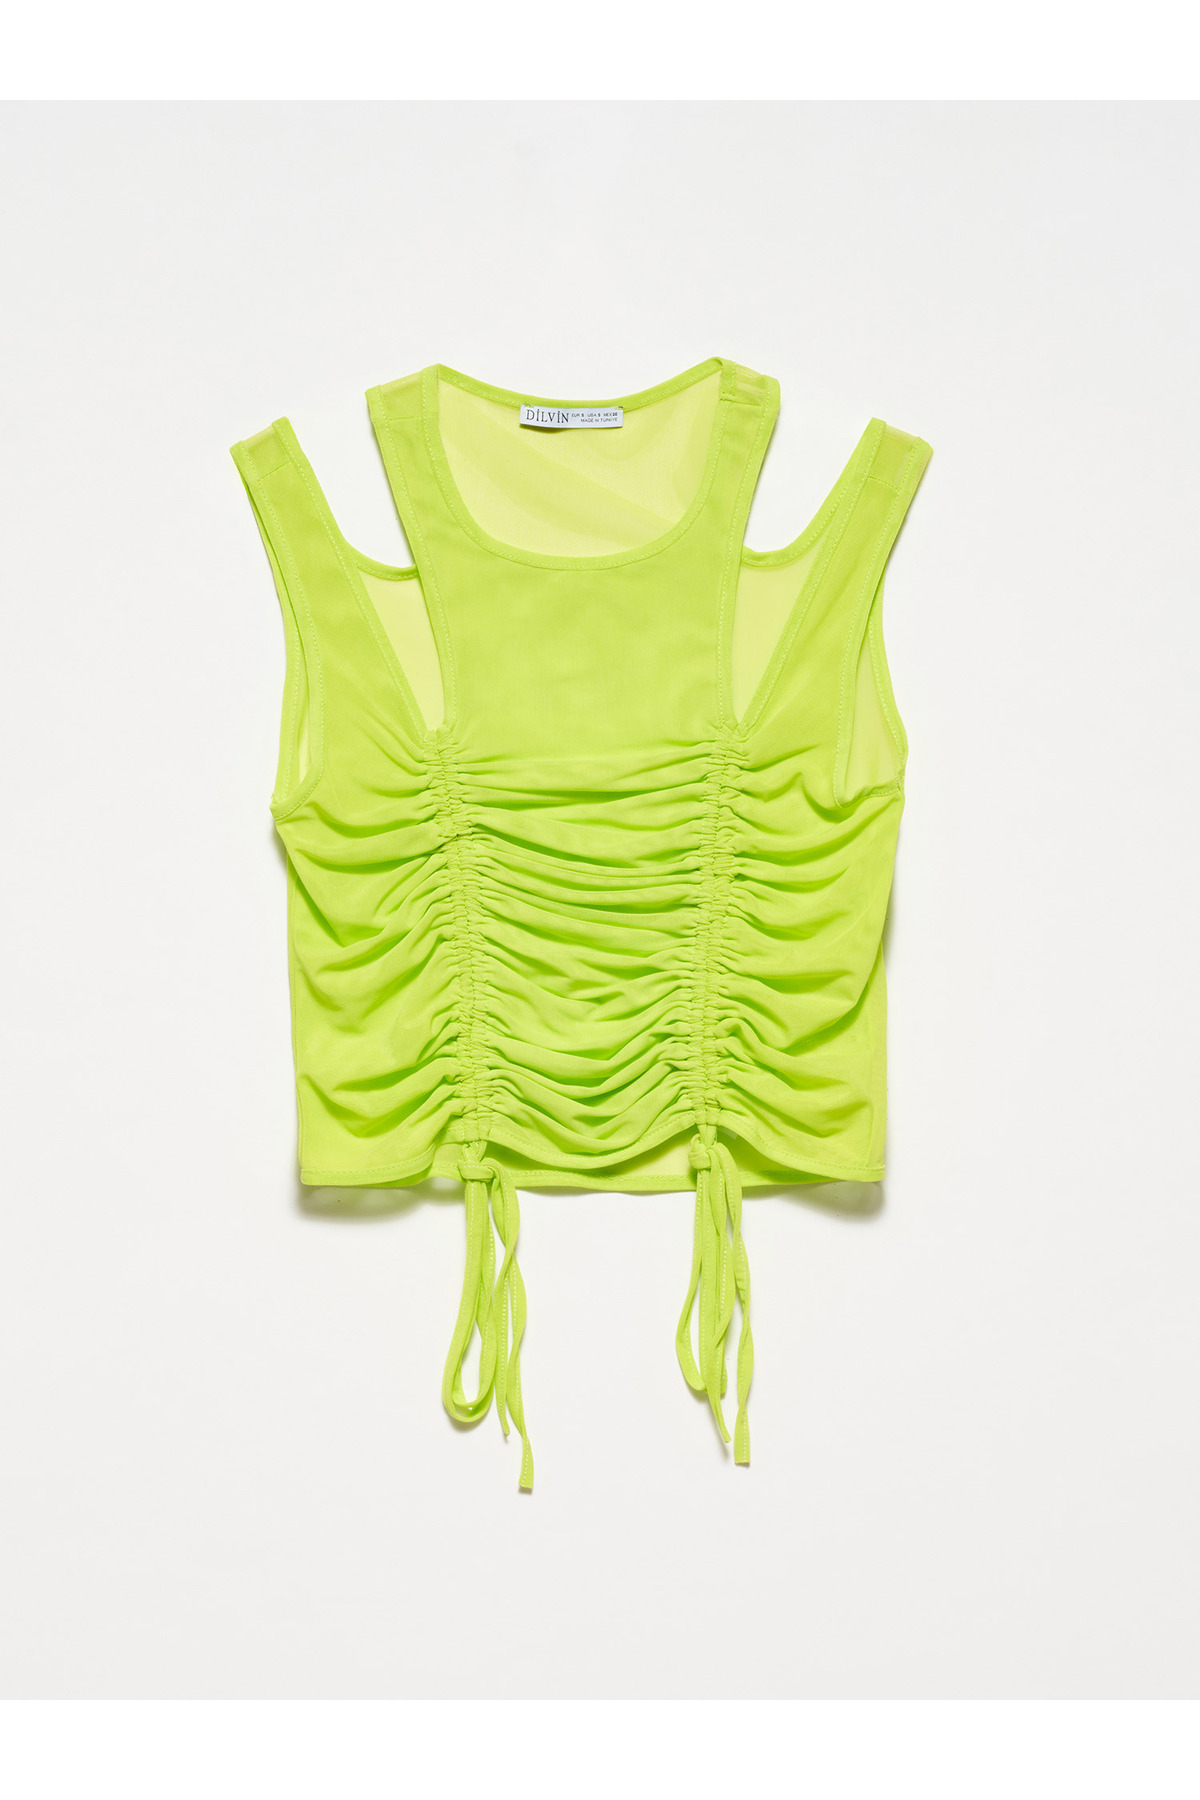 Dilvin 20216 Shirred Tulle Top-lime